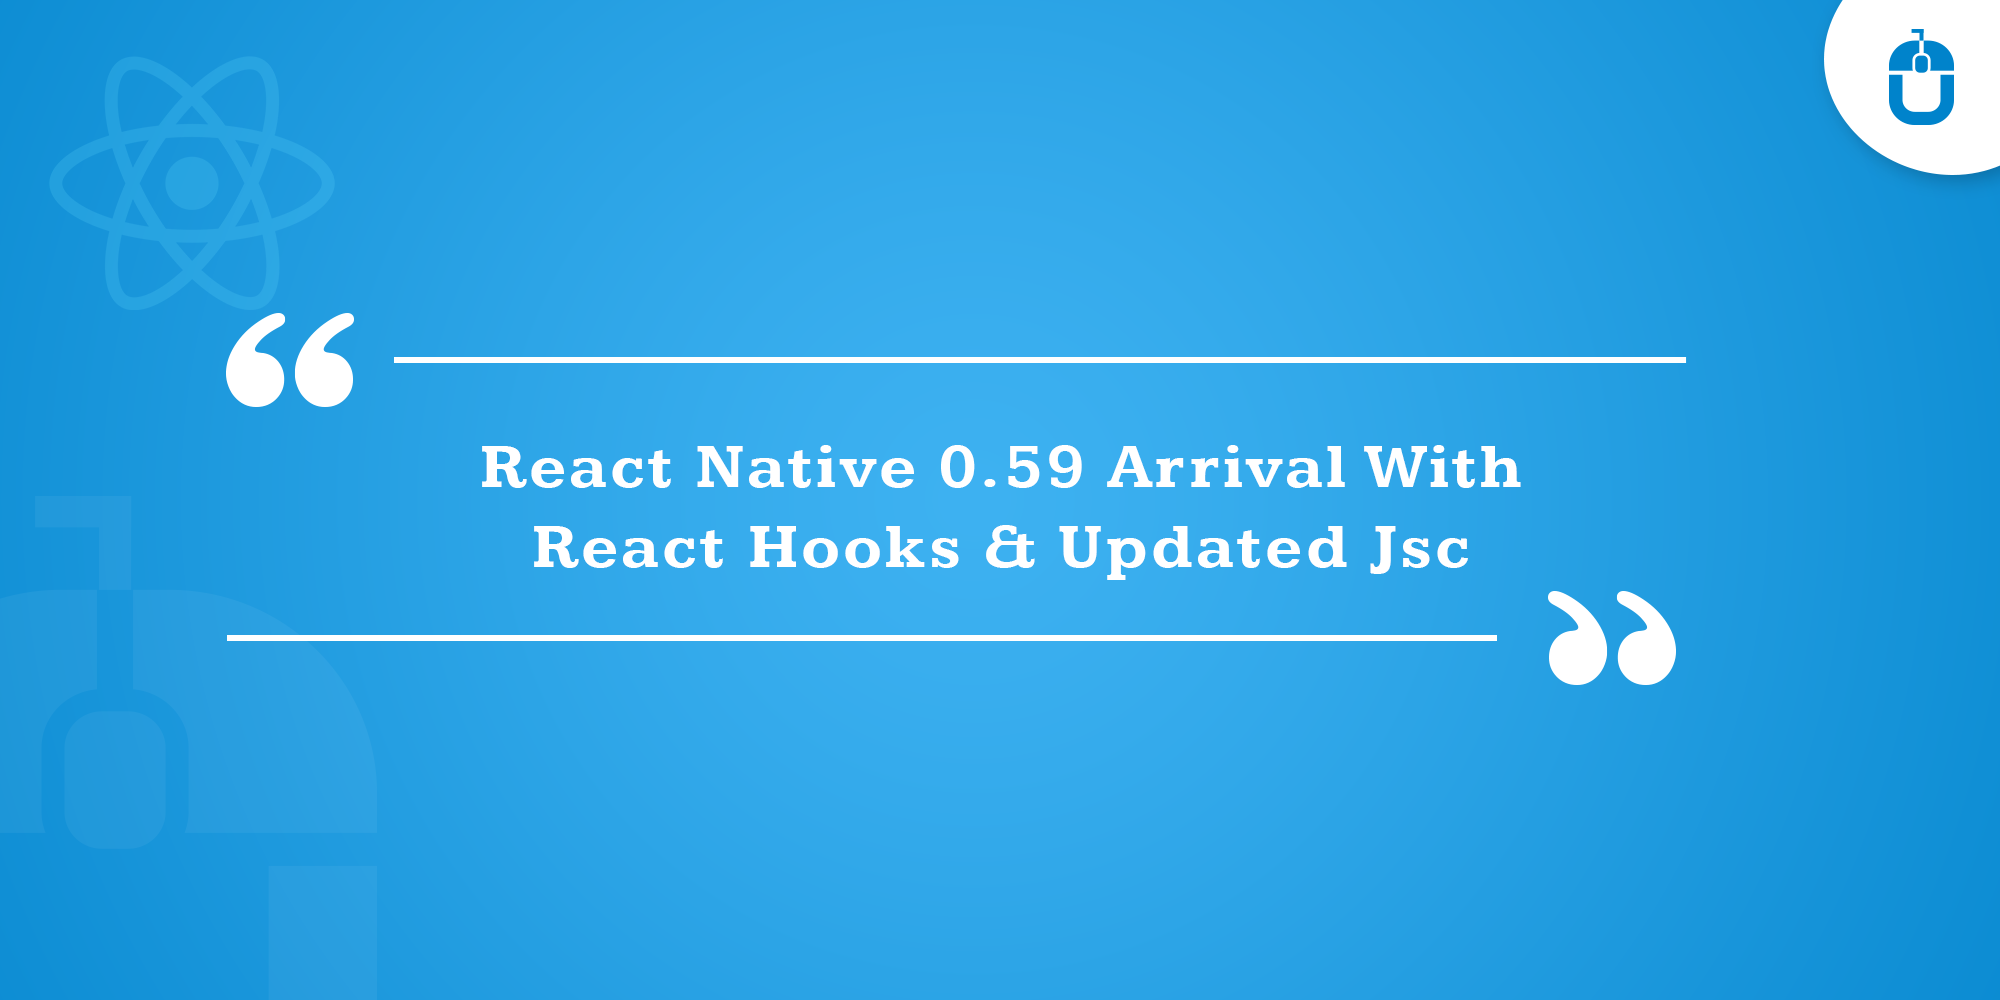 React Native 0.59 Arrival With React Hooks & Updated Jsc